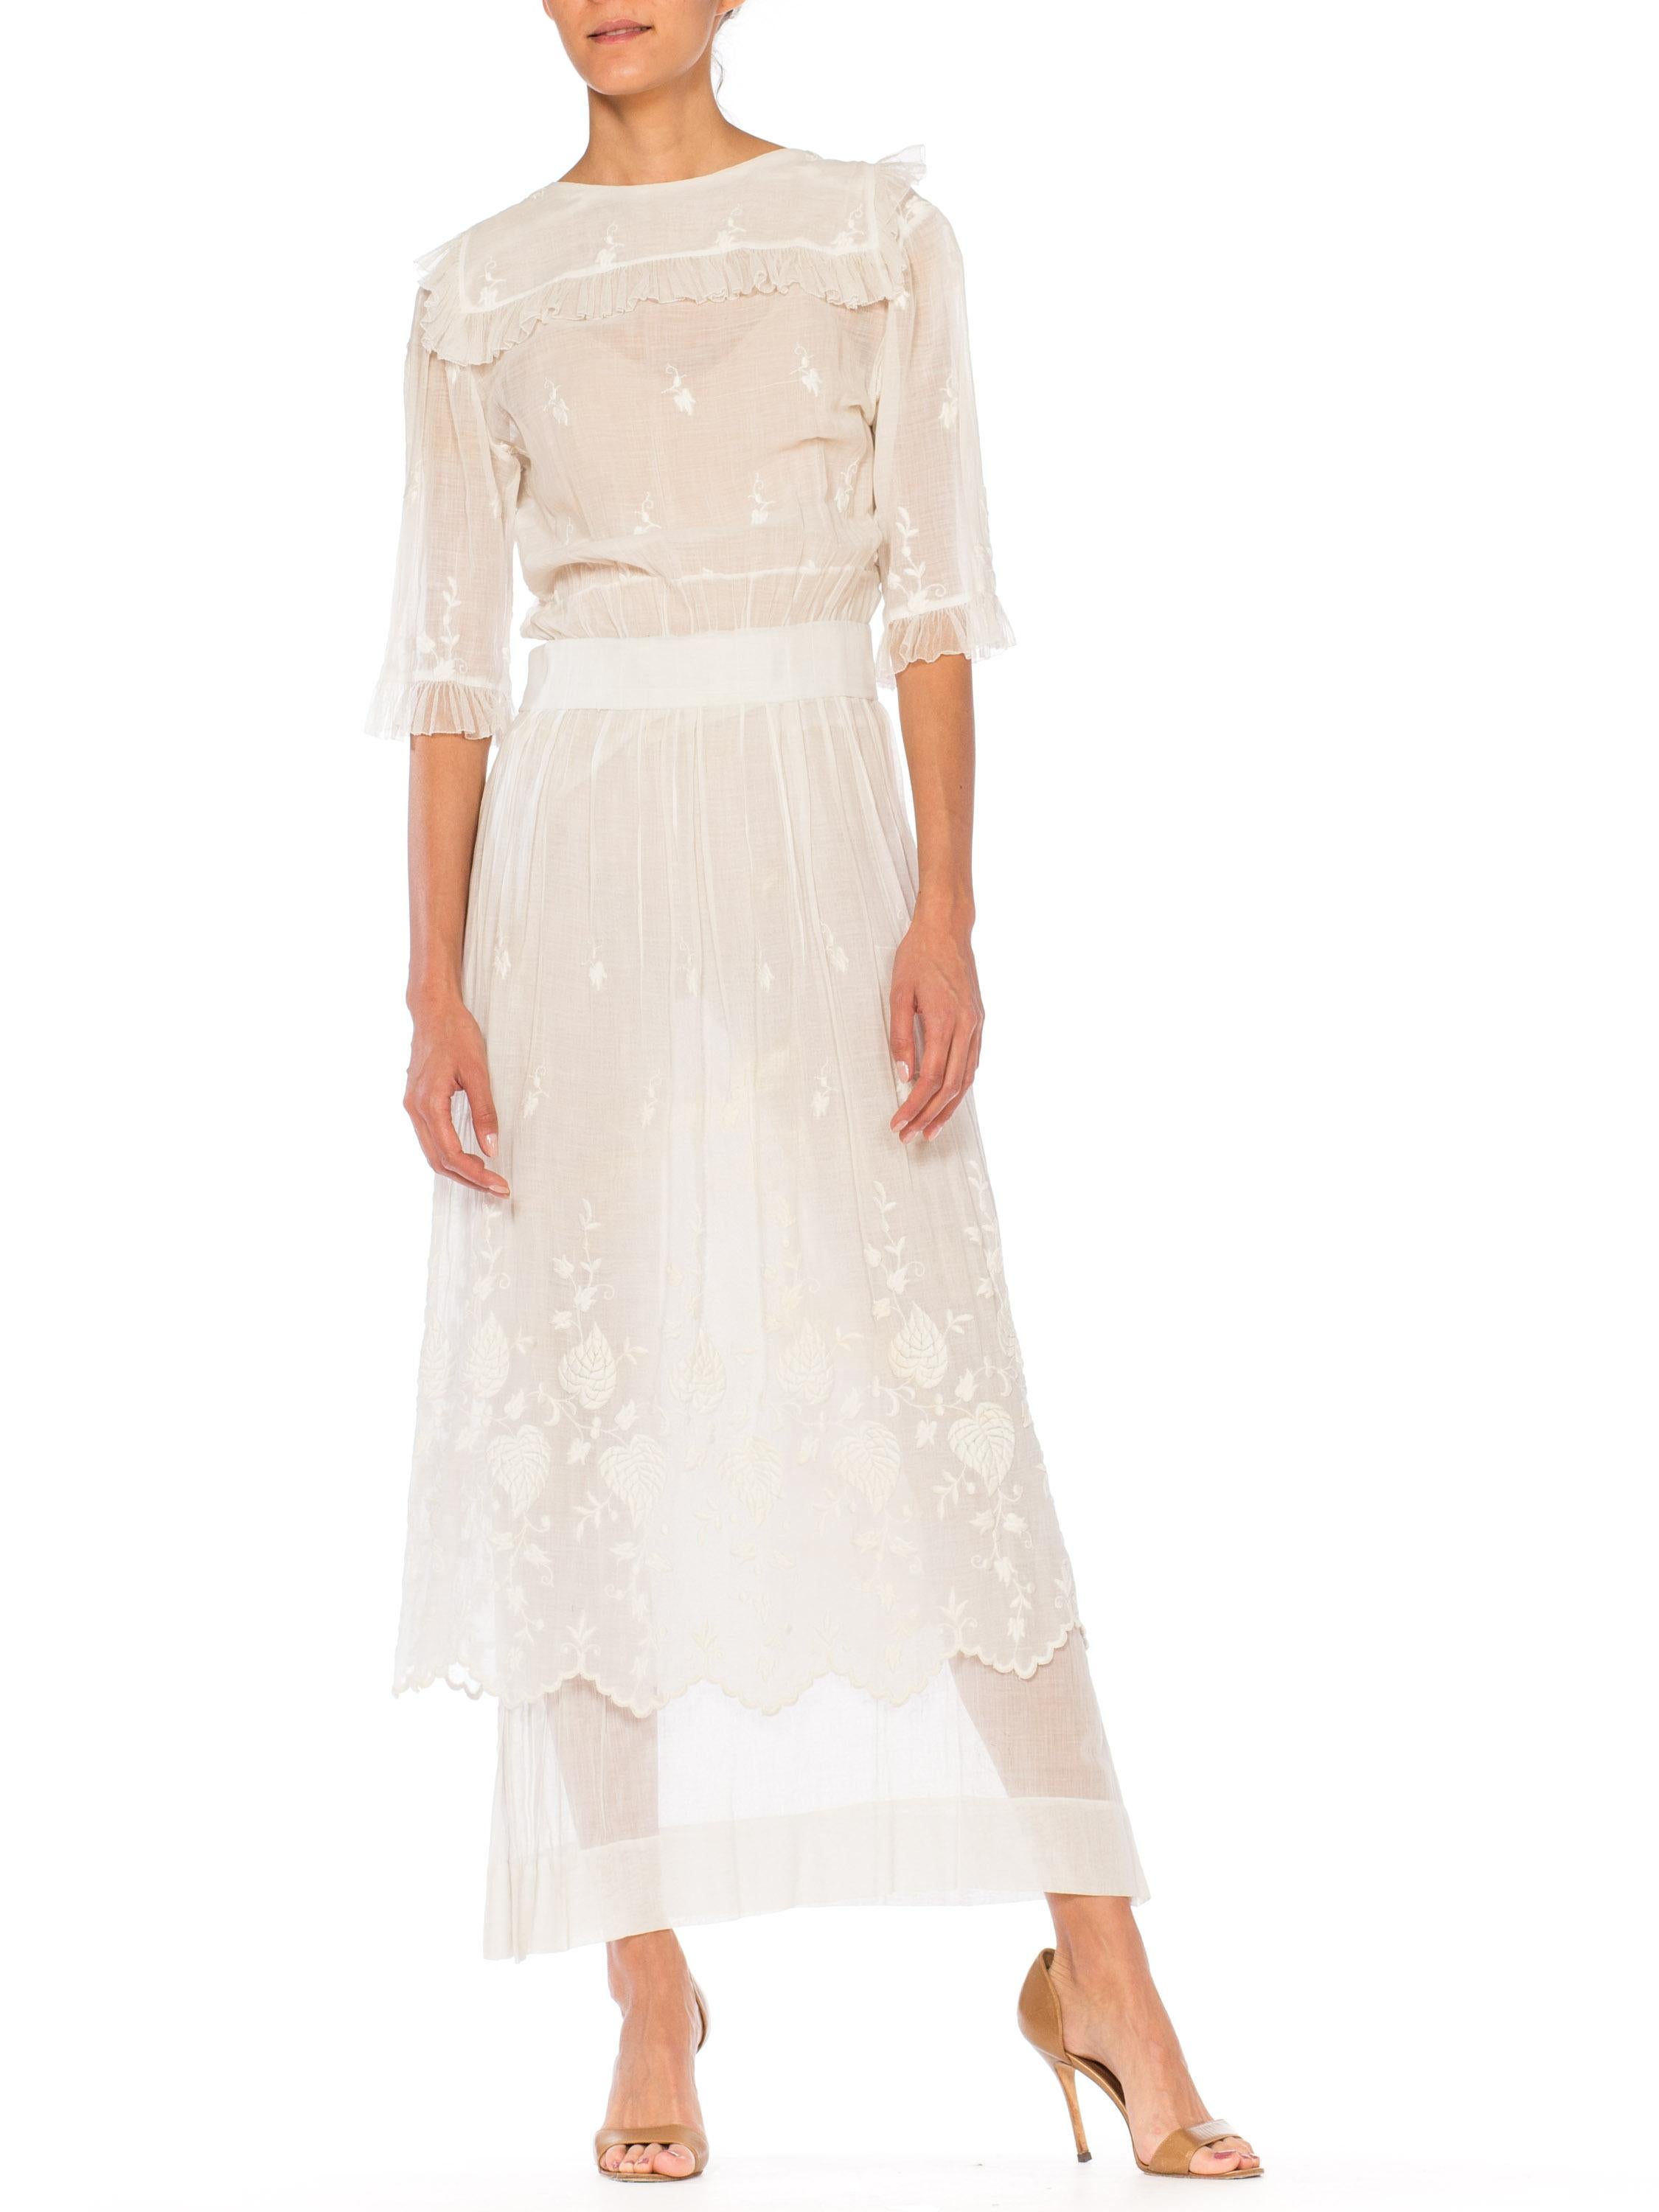 1910S White Embroidered Cotton Voile Edwardian Tea Dress With Sleeves For Sale 4